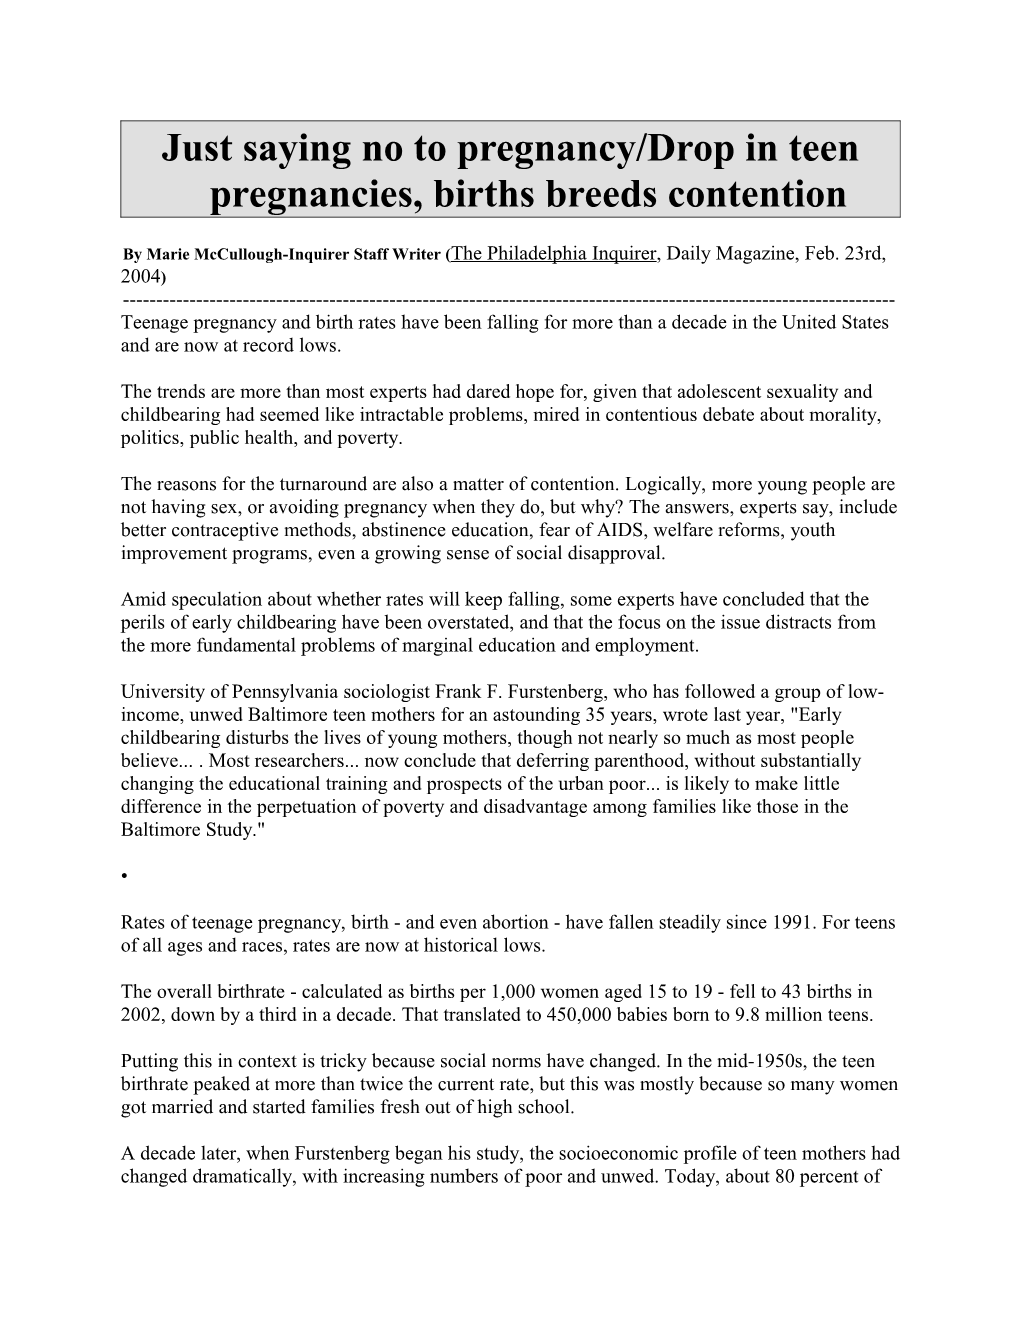 Just Saying No to Pregnancy/Drop in Teen Pregnancies, Births Breeds Contention